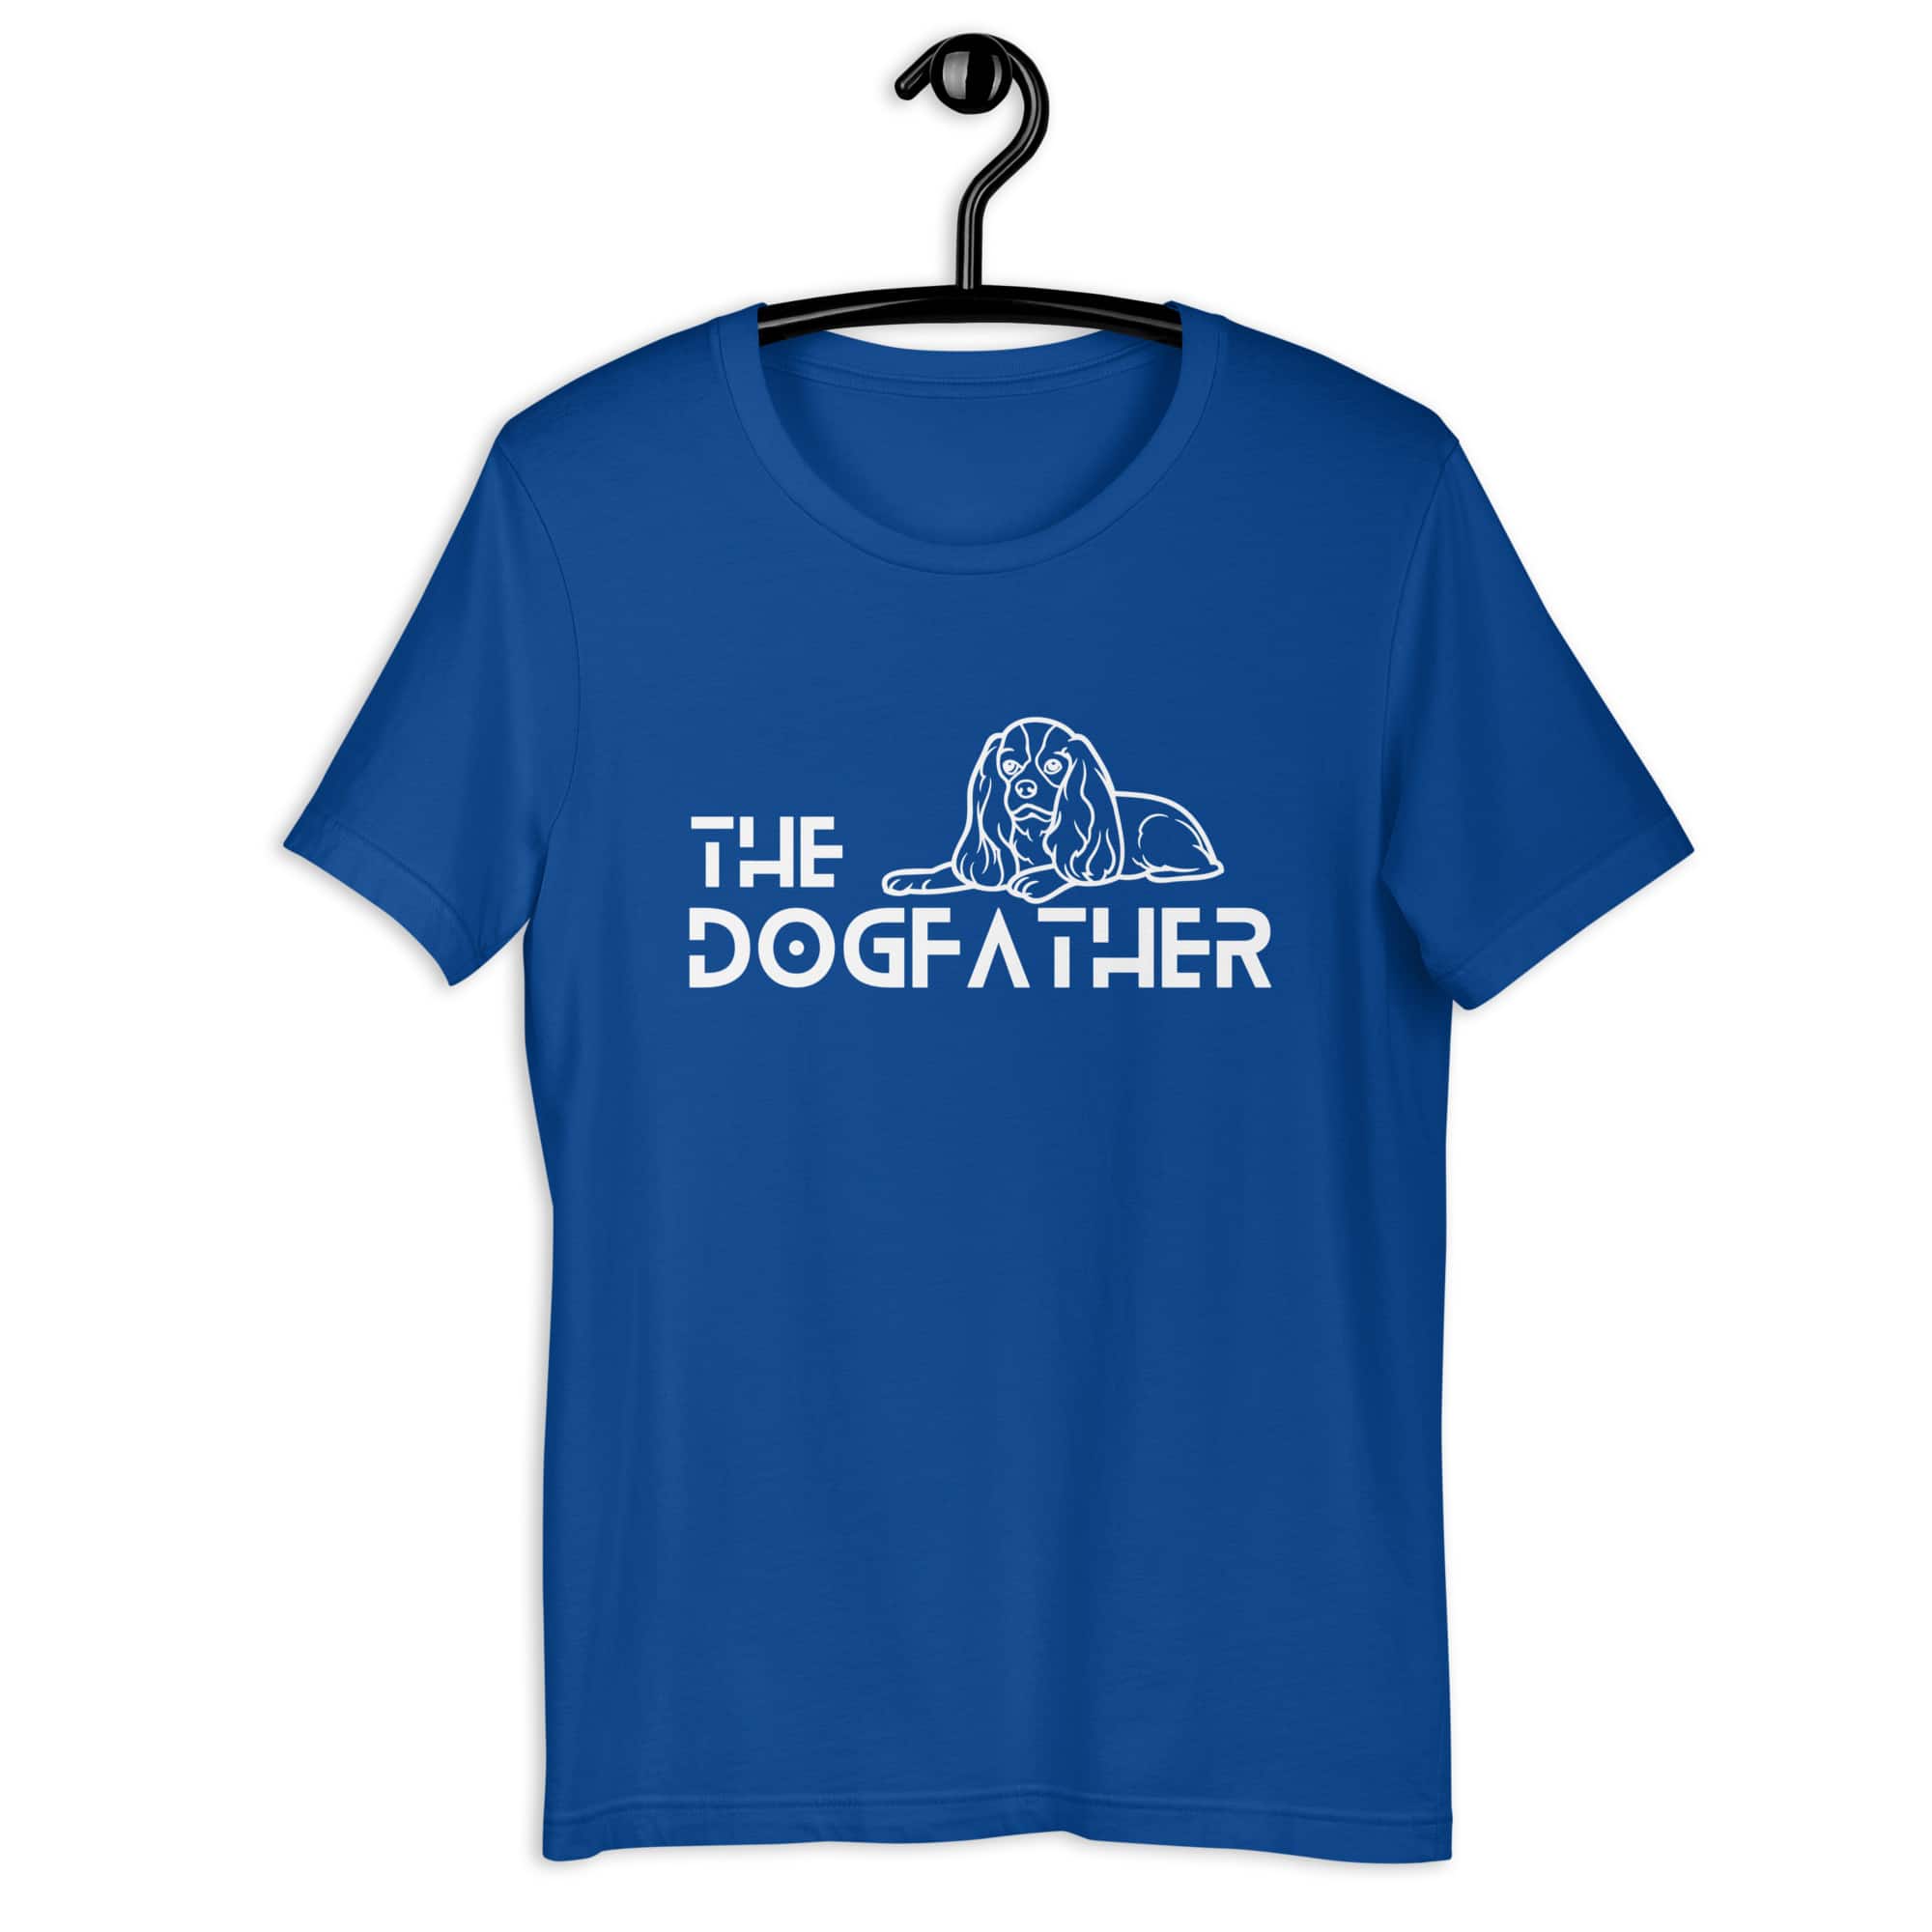 The Dogfather Hounds Unisex T-Shirt. Royal Blue